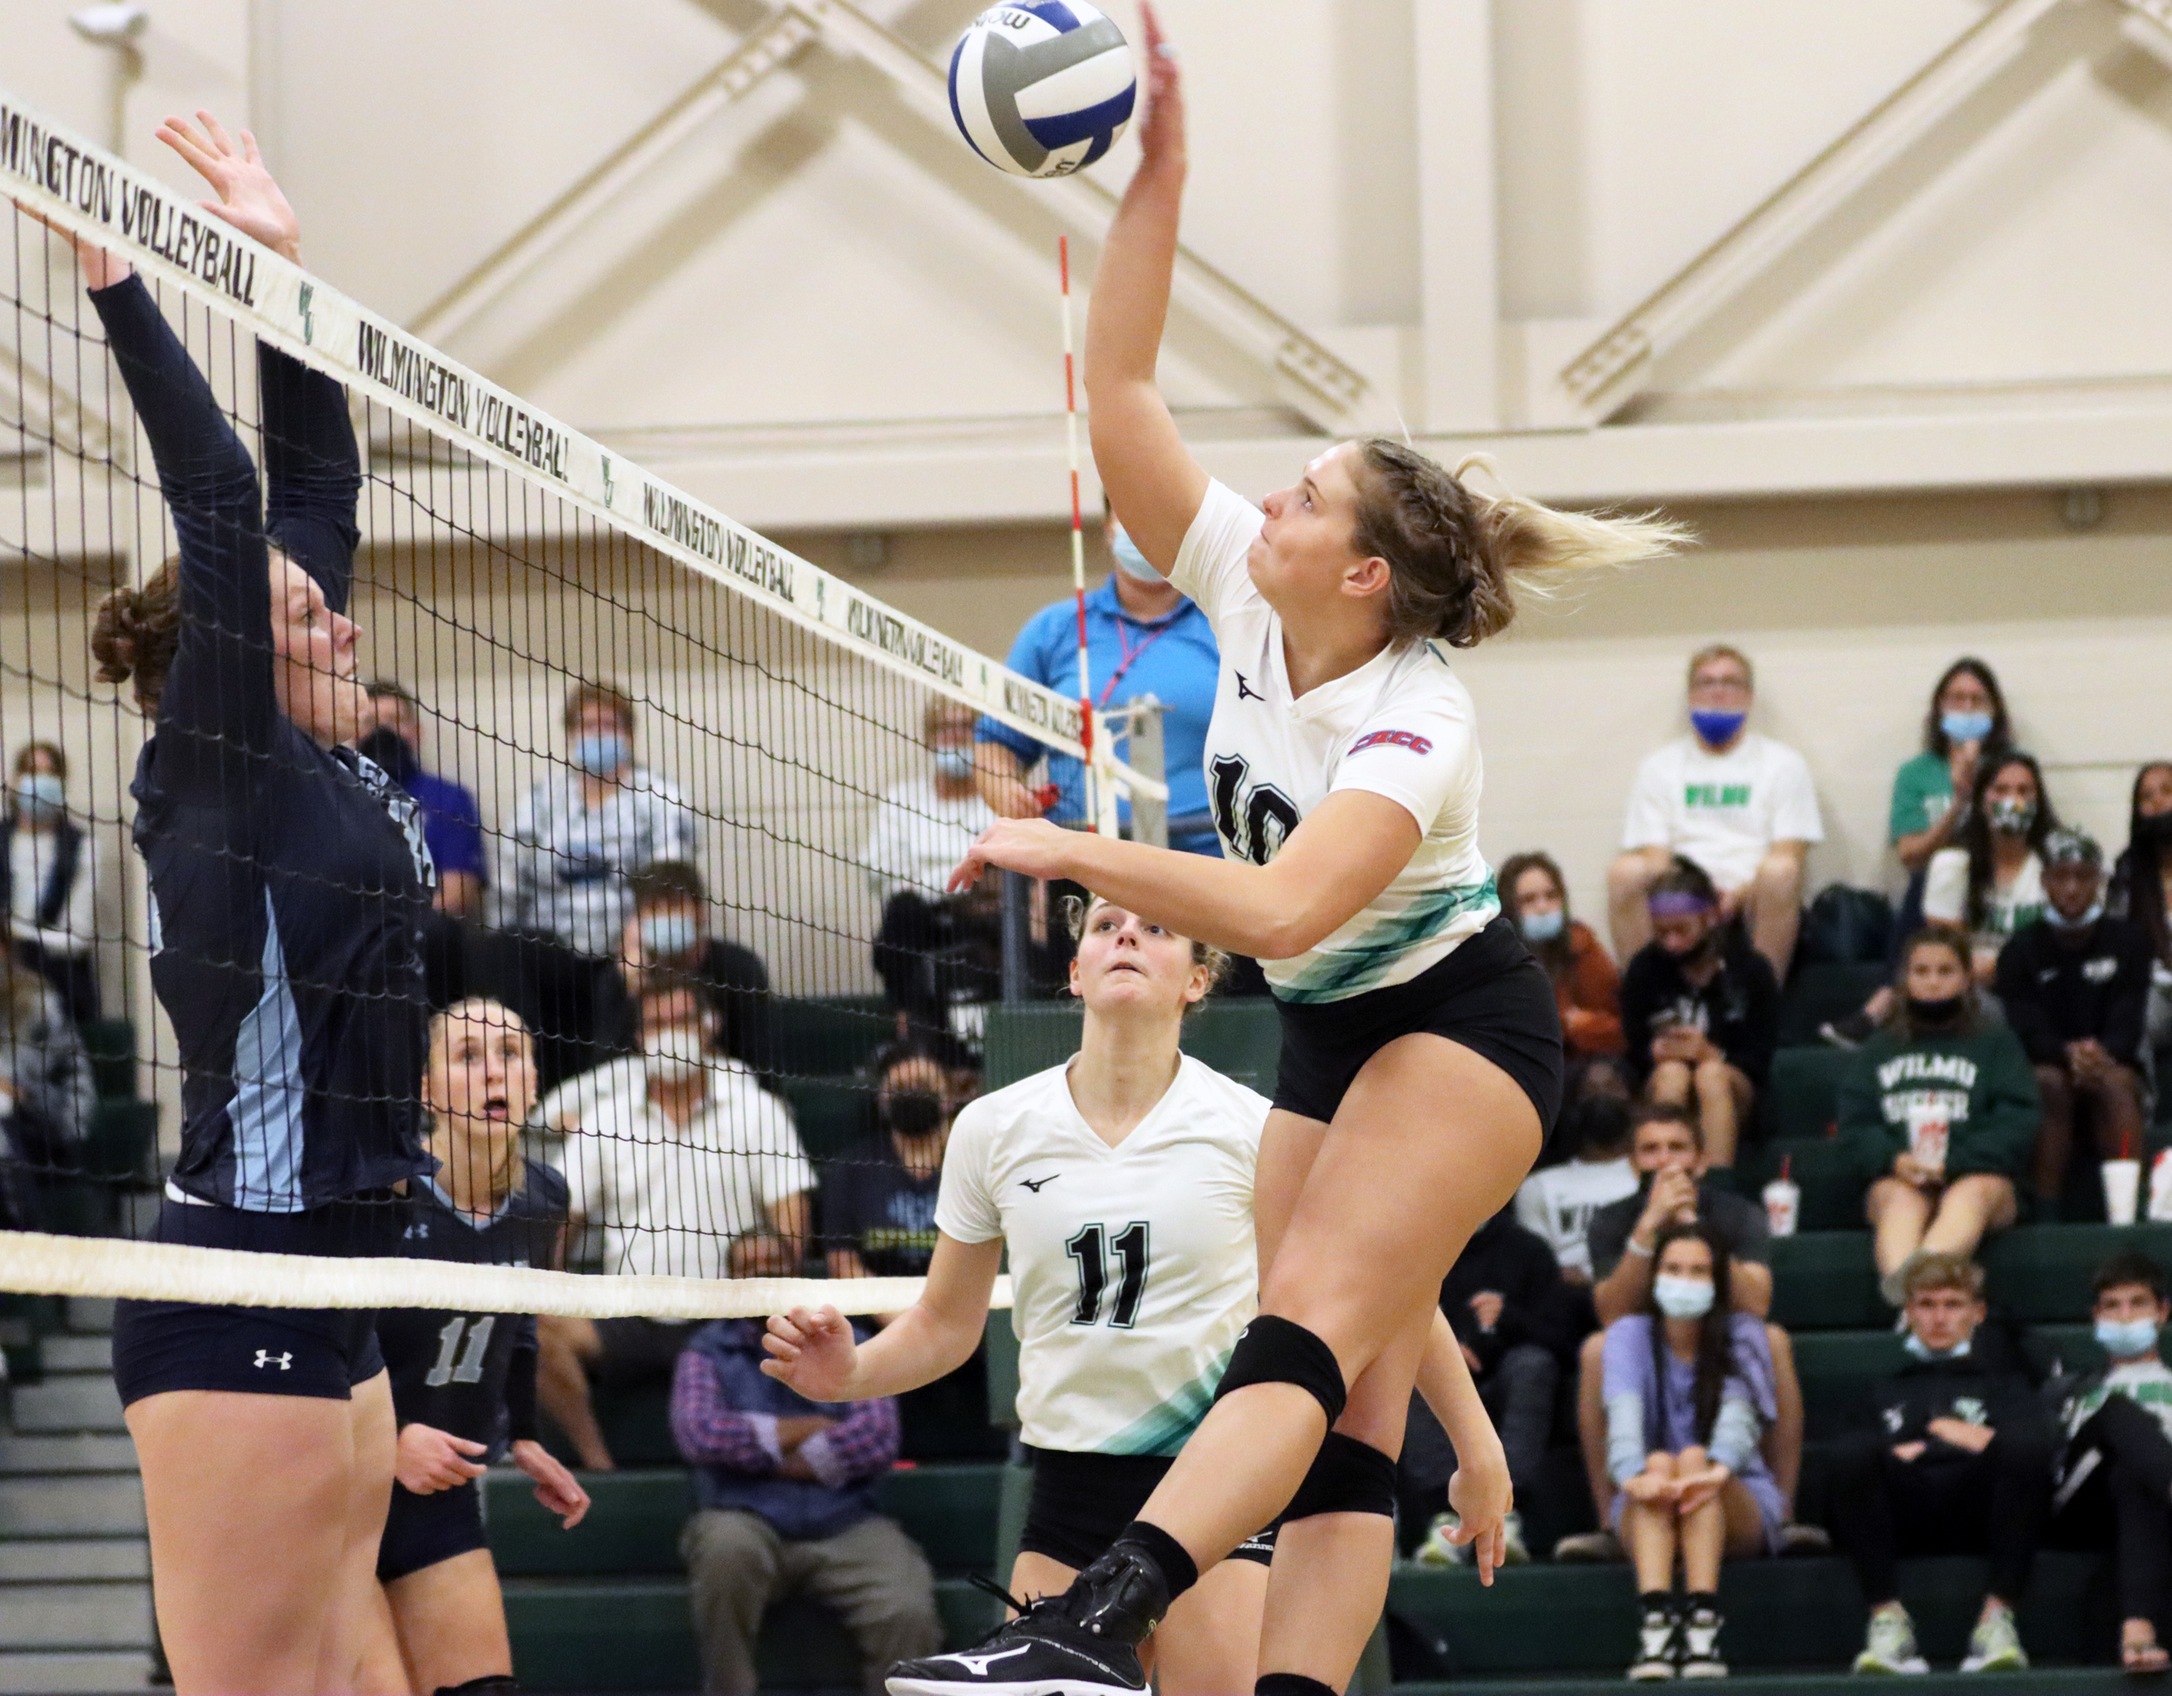 Photo of Dorie Moore putting down a kill against Jefferson. Copyright 2021; Wilmington University. All rights reserved. Photo by Dan Lauletta. October 5, 2021 vs. Jefferson.